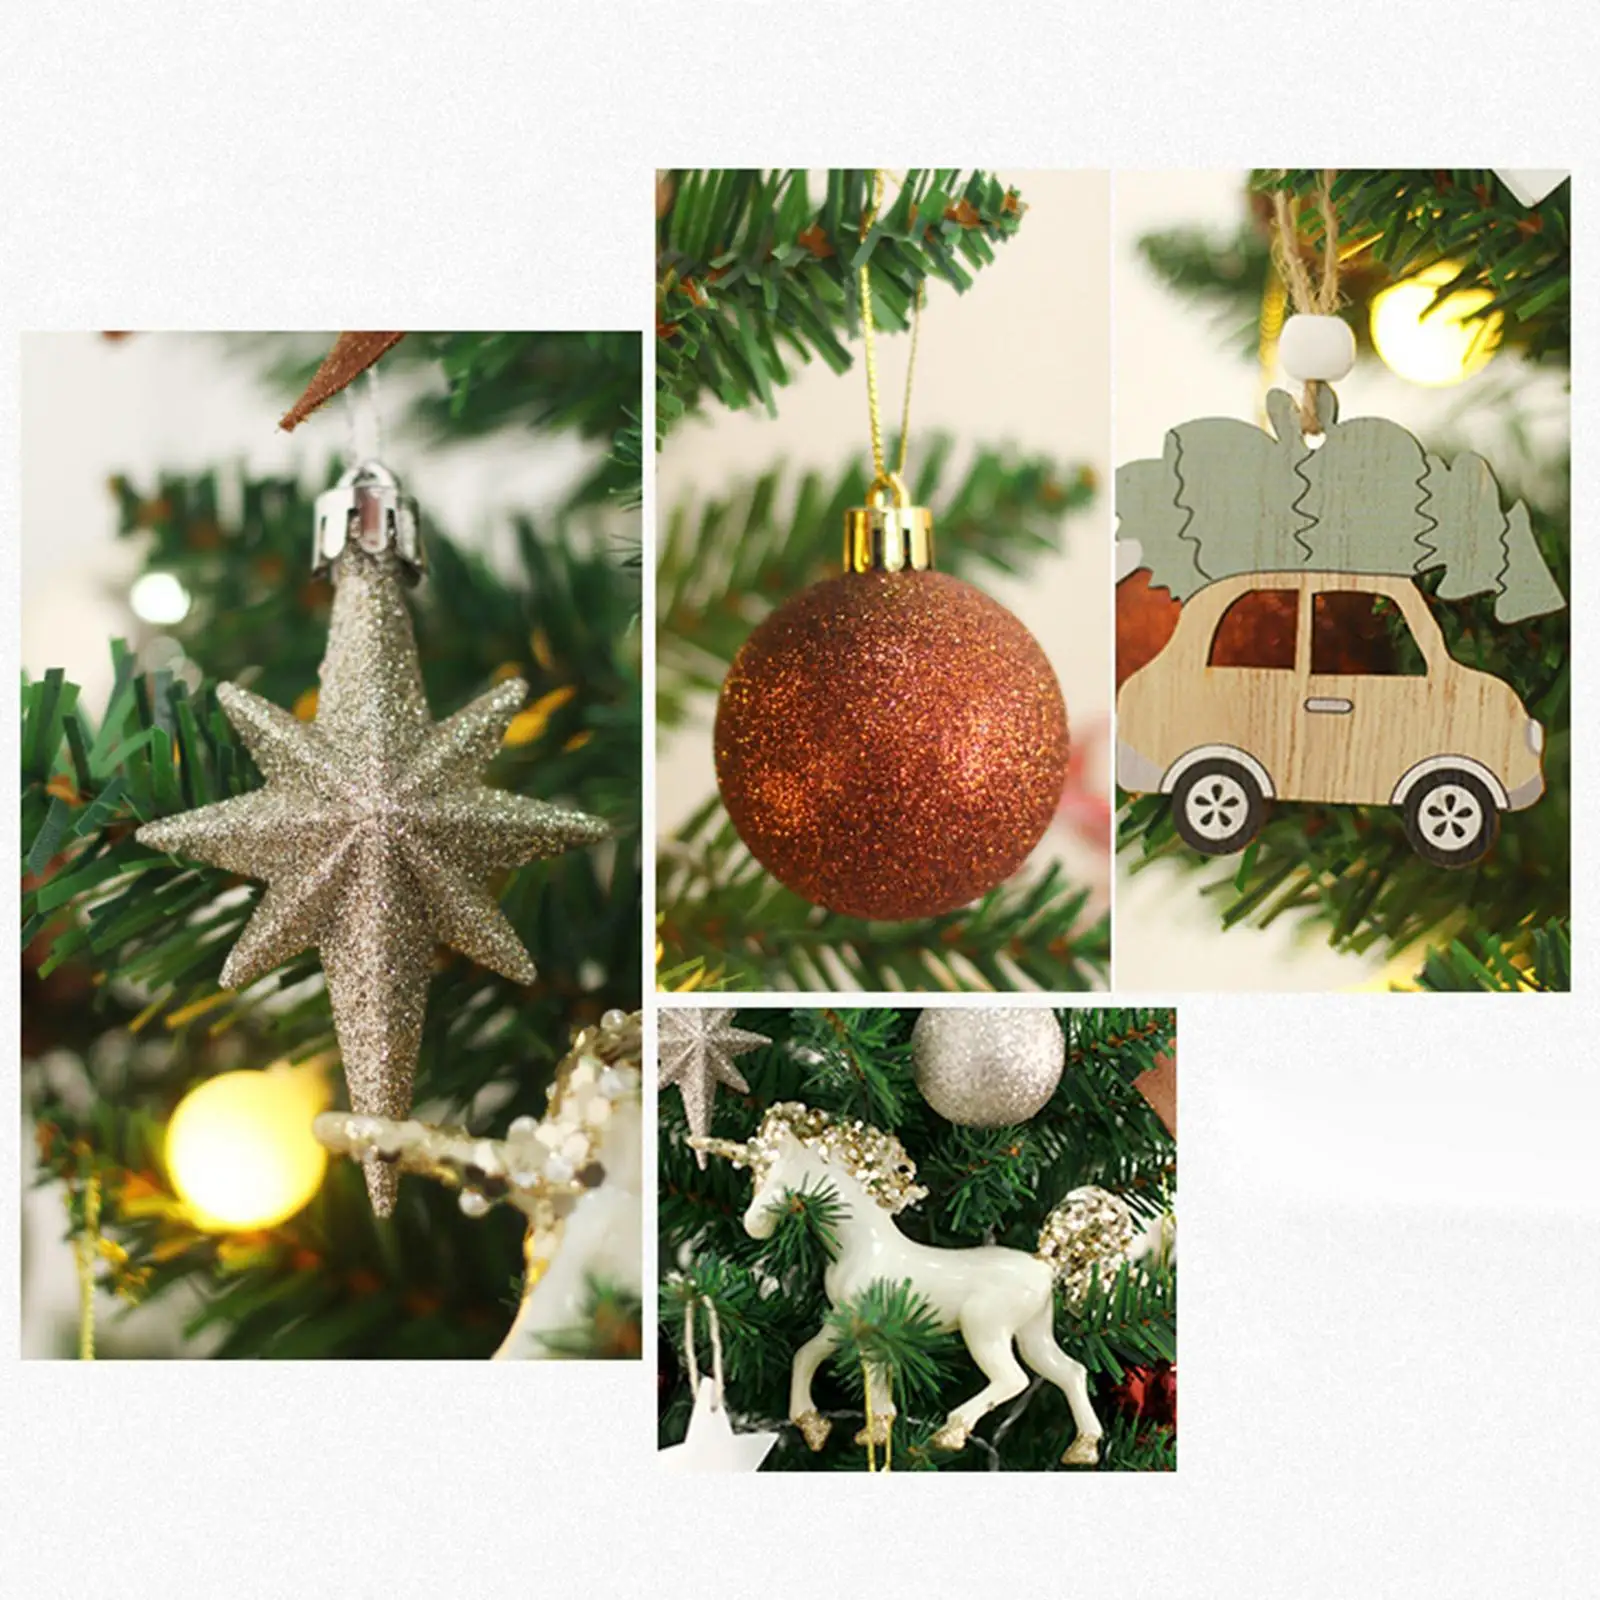 Mini Christmas Tree Artificial Ornament 50cm Home Decors Centerpiece with Lights Photo Props PVC for holiday Office